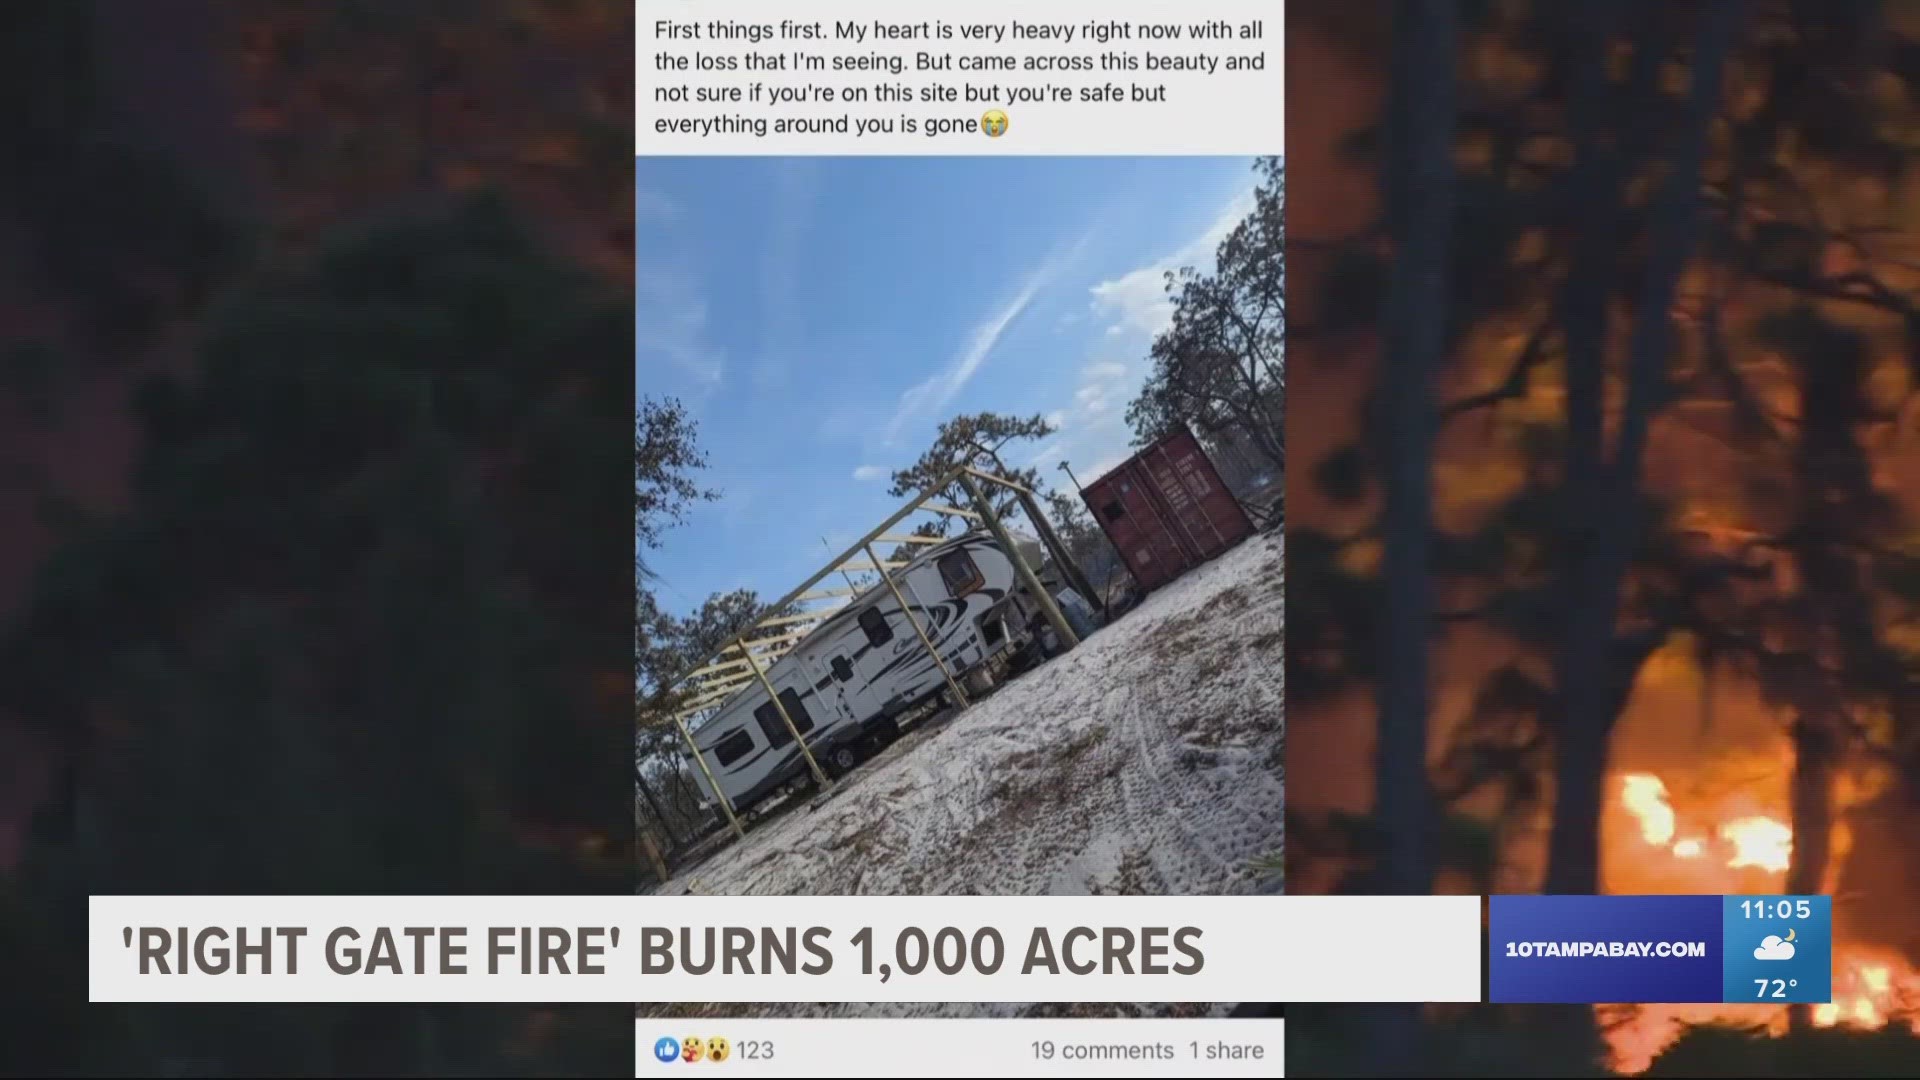 The Florida Forest Service is searching for any signs this could be arson and a $5,000 reward is being offered for any information that leads to an arrest.